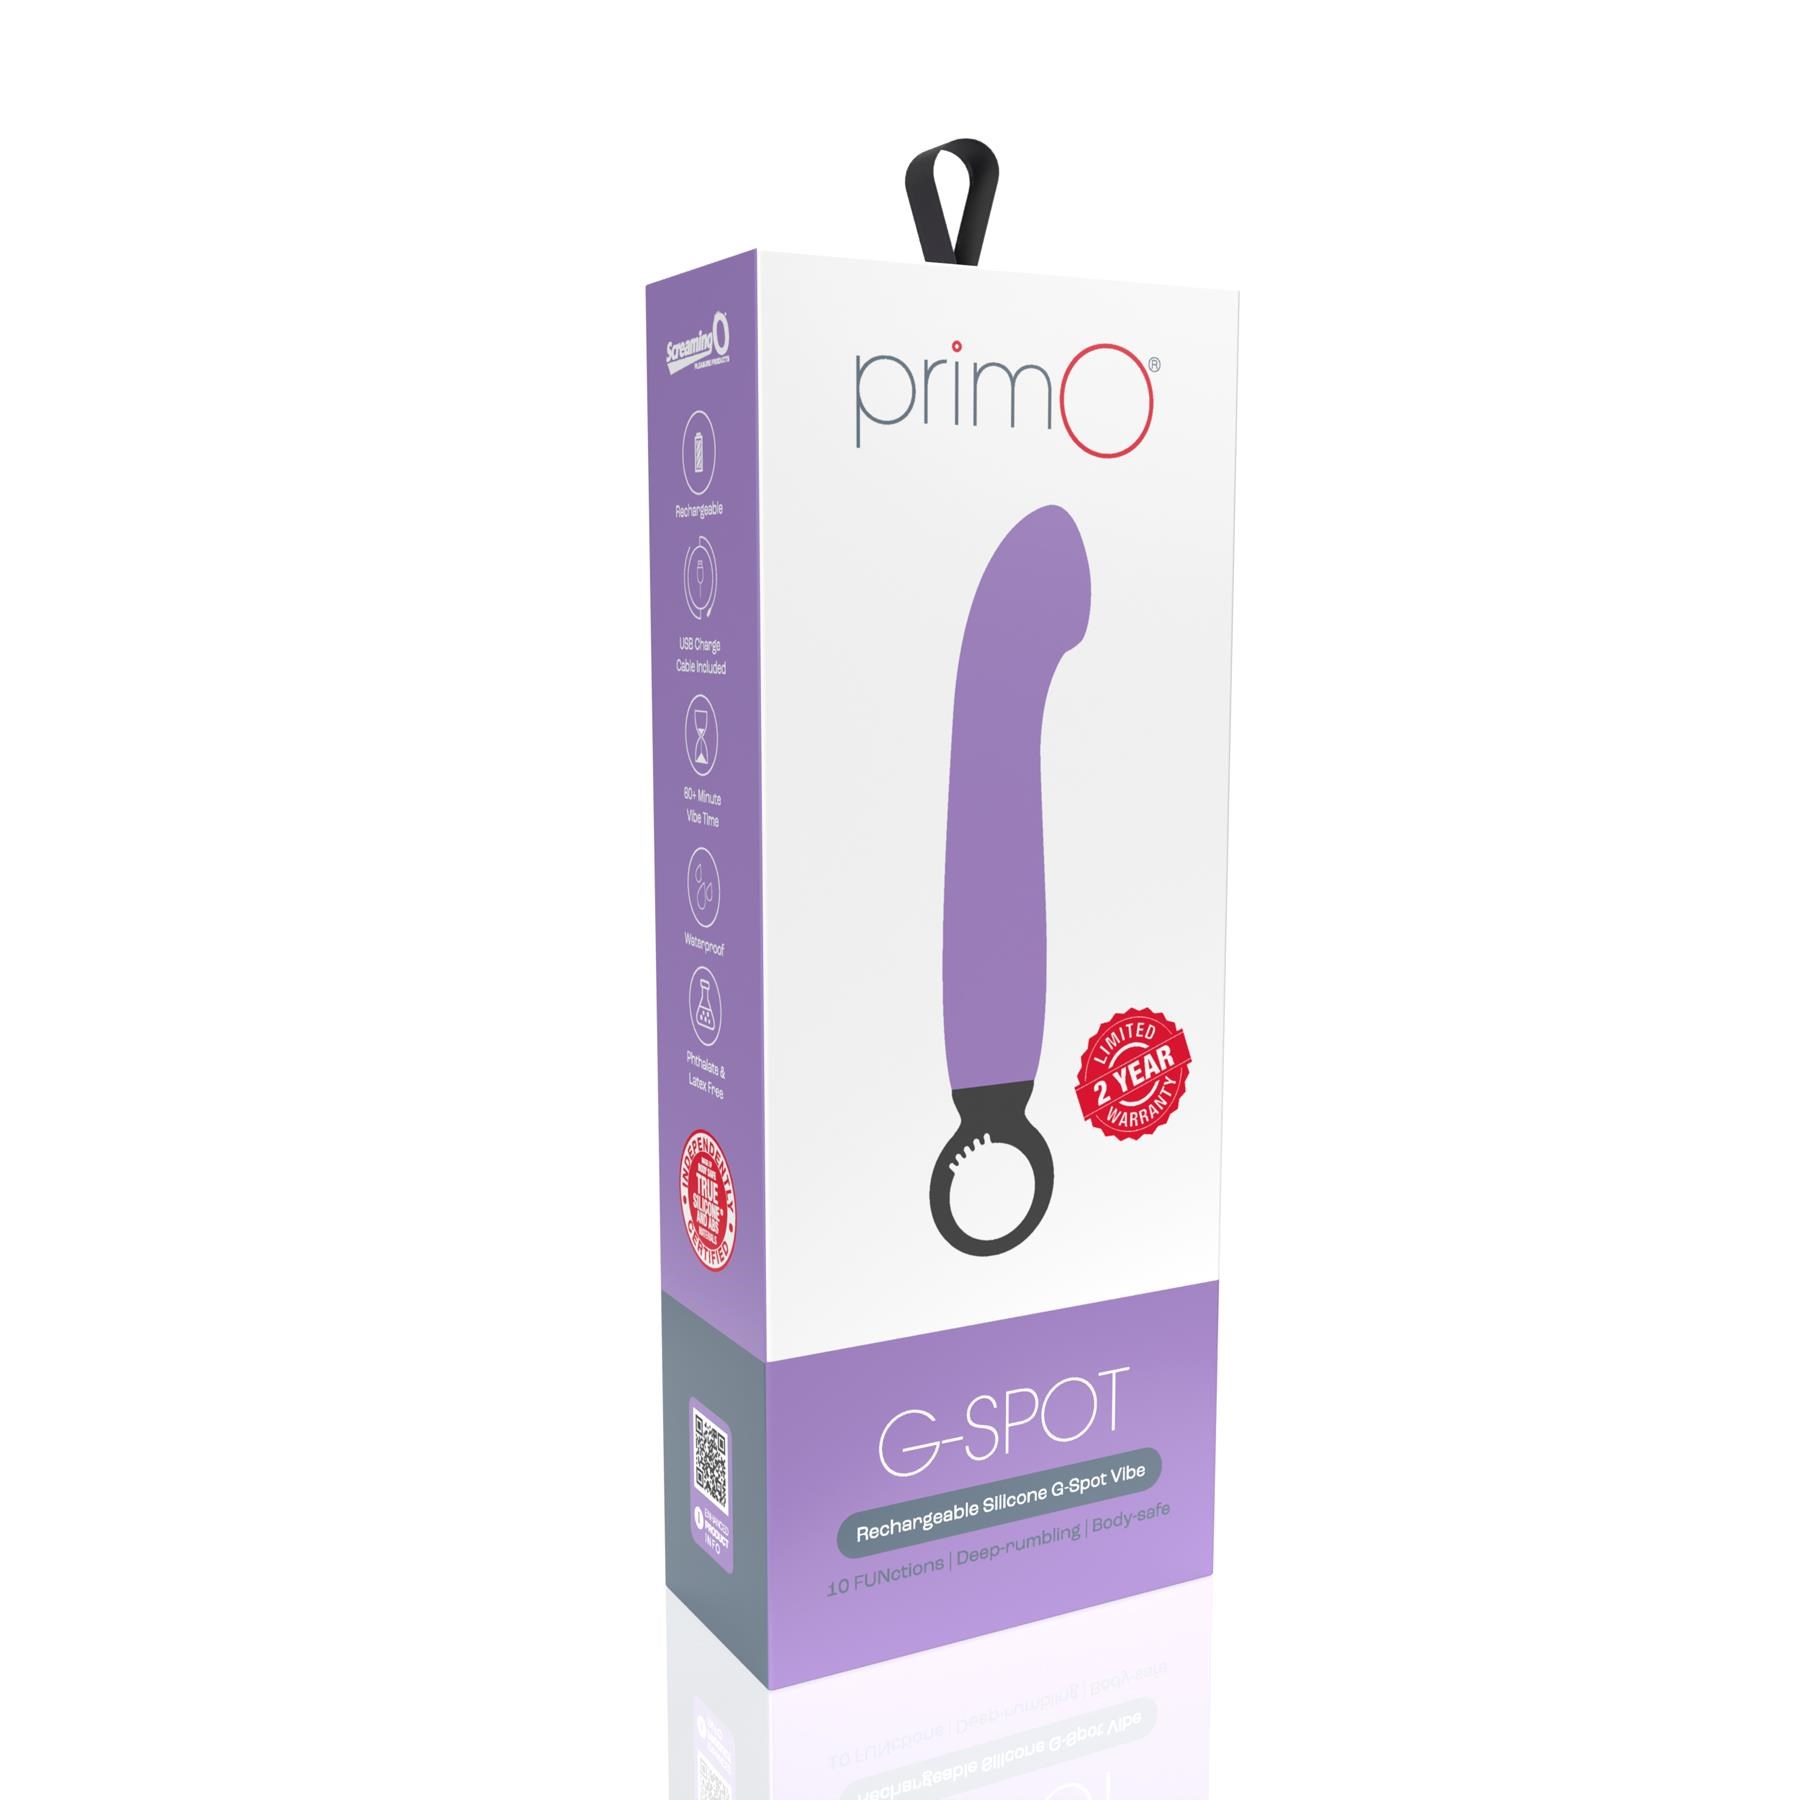 Screaming O Primo Rechargeable G-Spot Vibration - Packaging